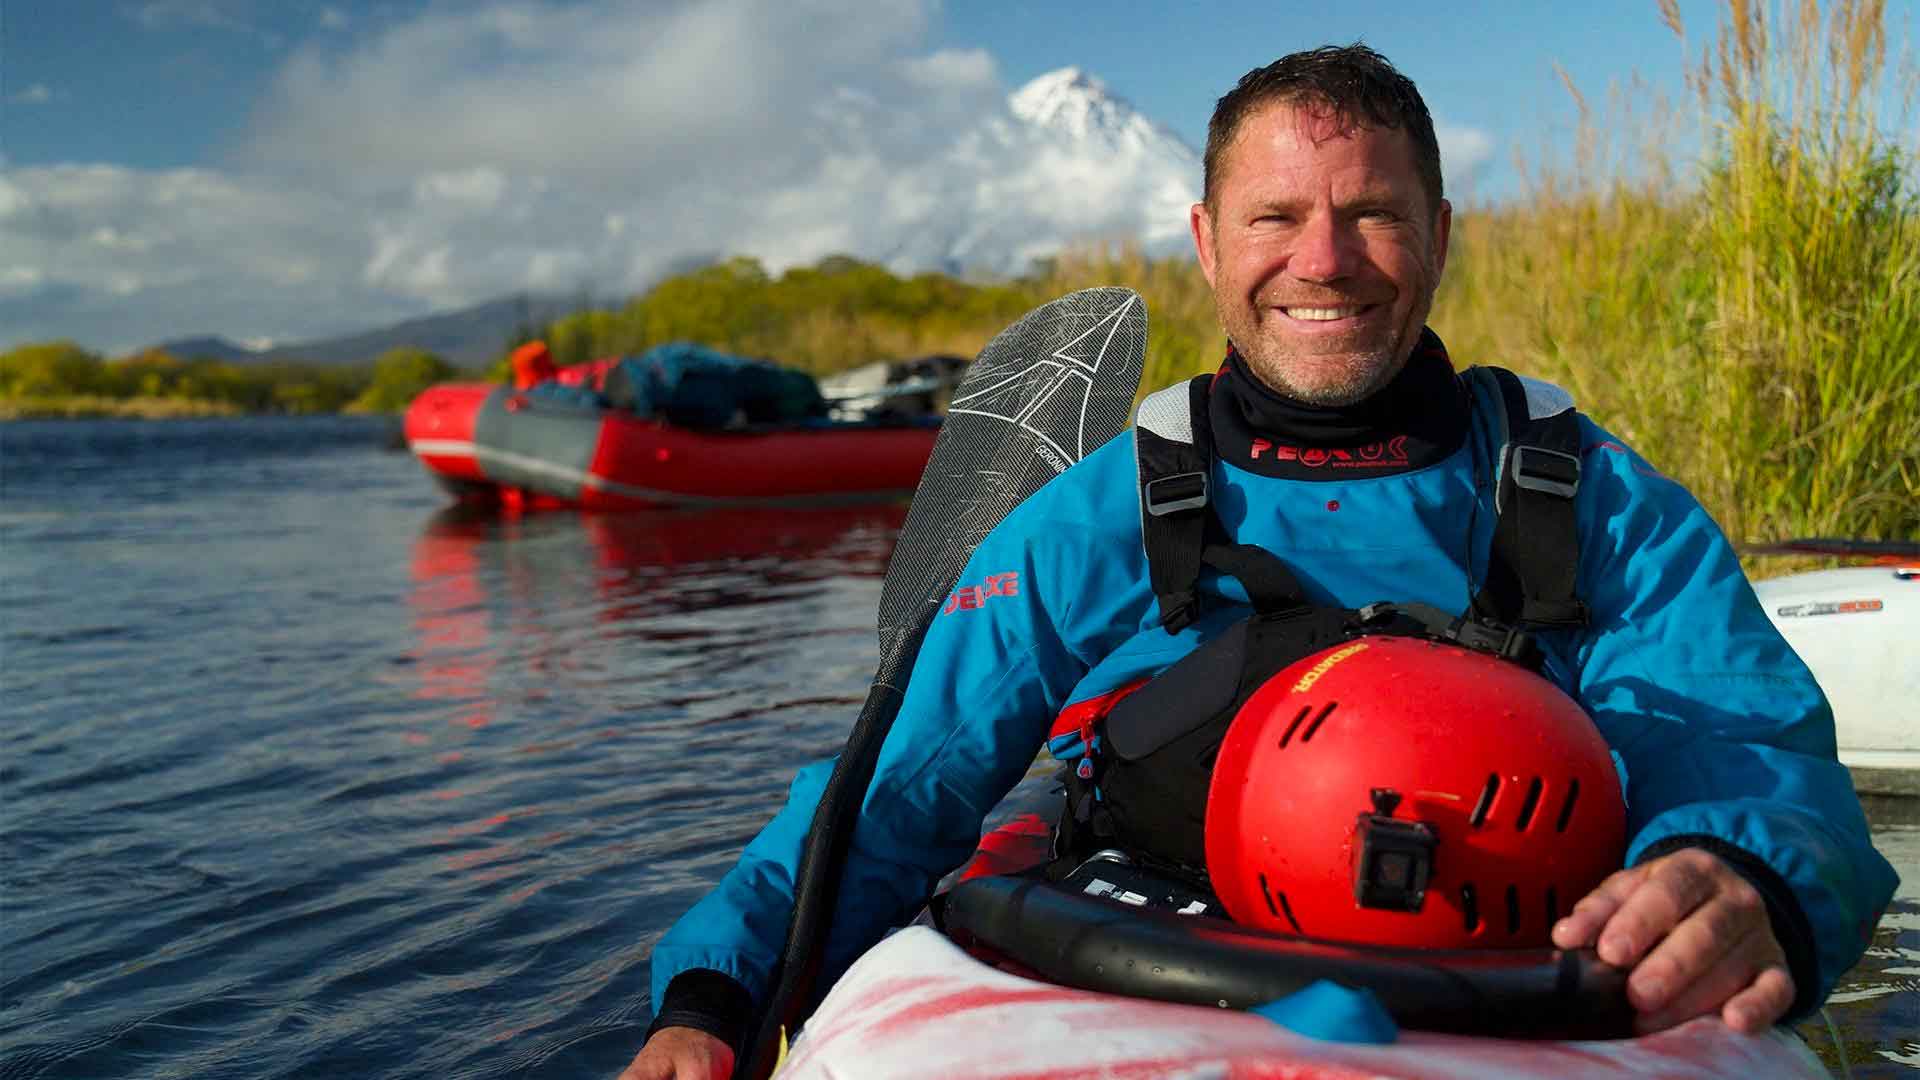 photo of Steve Backshall in a kayak on water